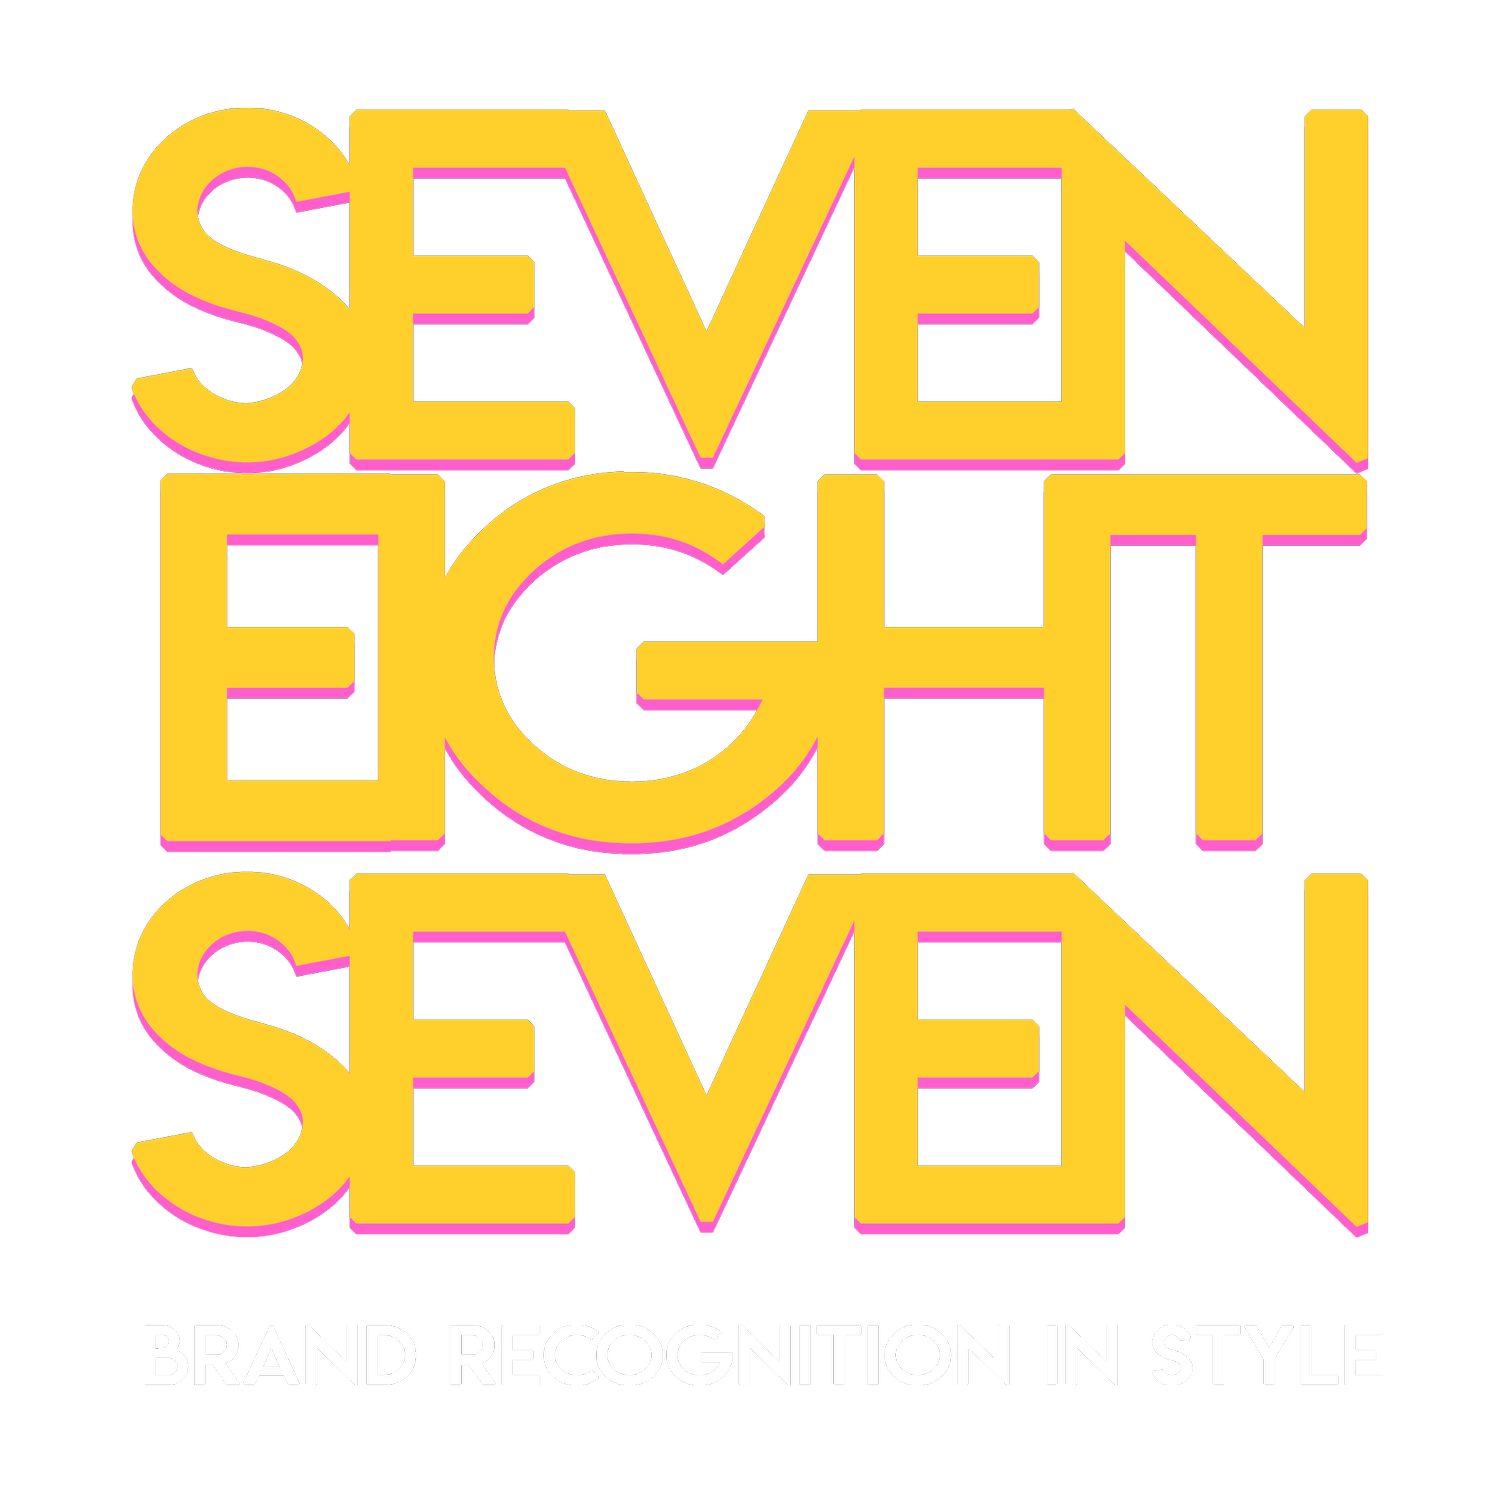 Seven Eight Seven Productions